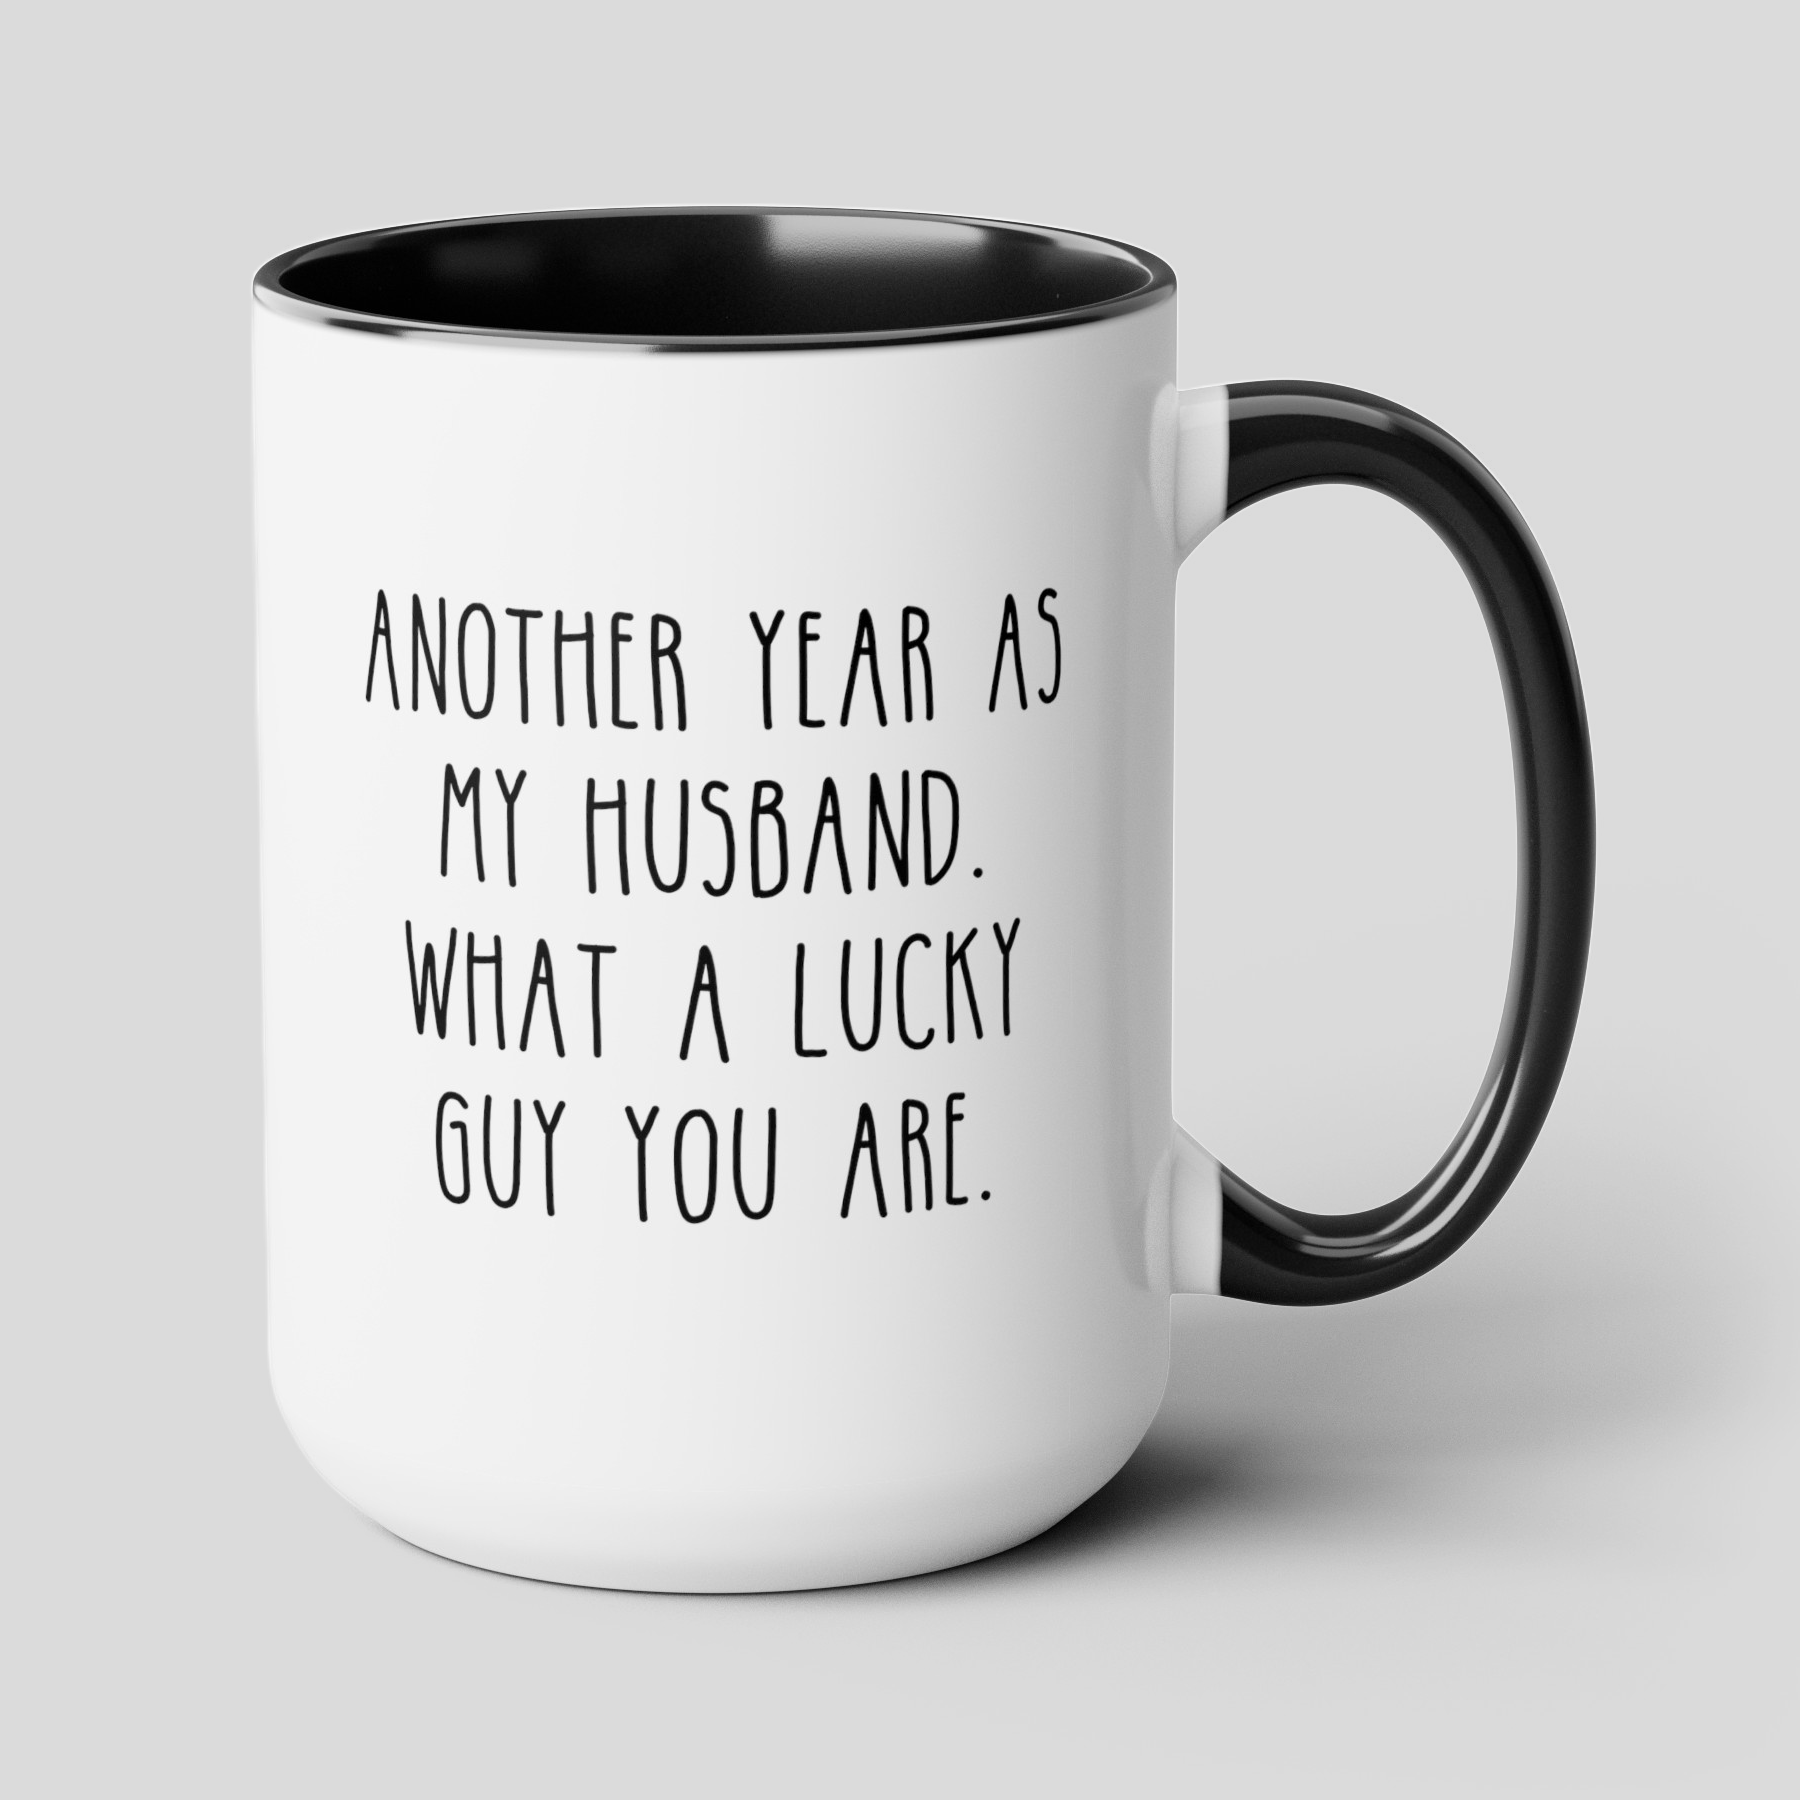 Another Year As My Husband What A Lucky Guy You Are 15oz white with black accent funny large coffee mug gift for Valentines sarcastic hubby fiance wedding anniversary waveywares wavey wares wavywares wavy wares cover